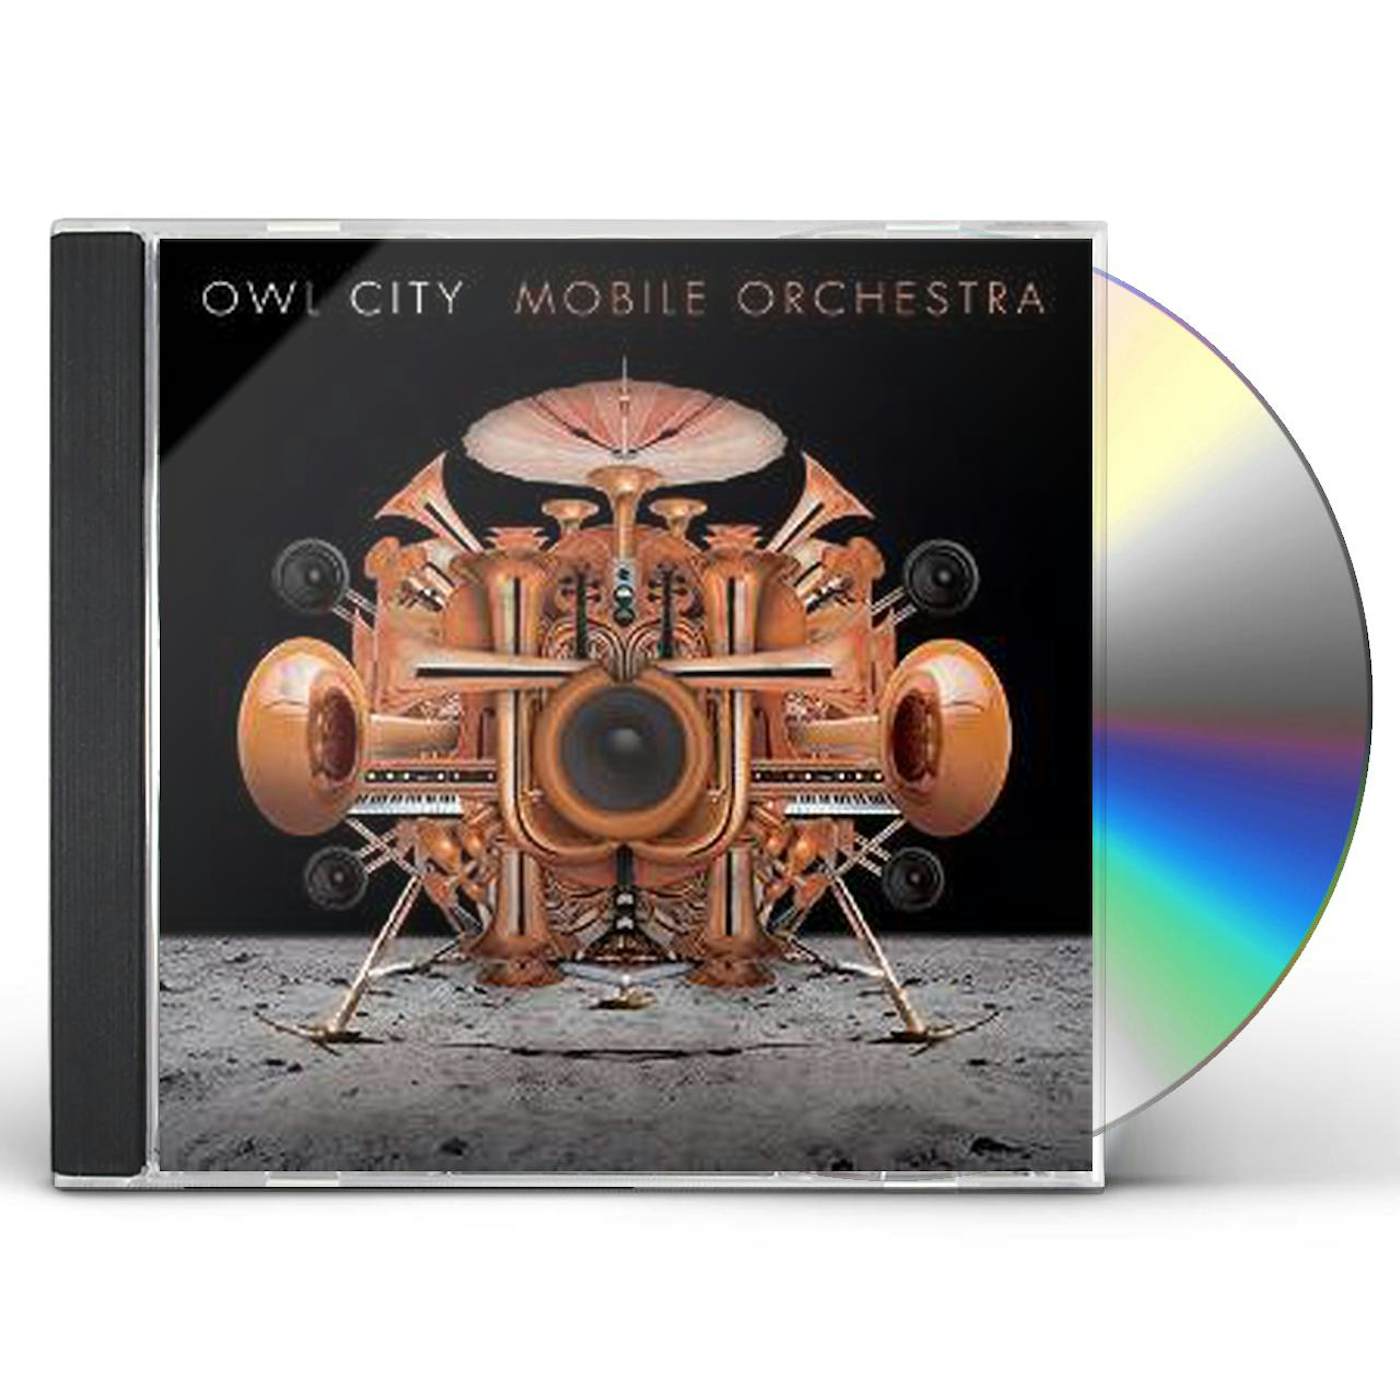 Owl City MOBILE ORCHESTRA CD